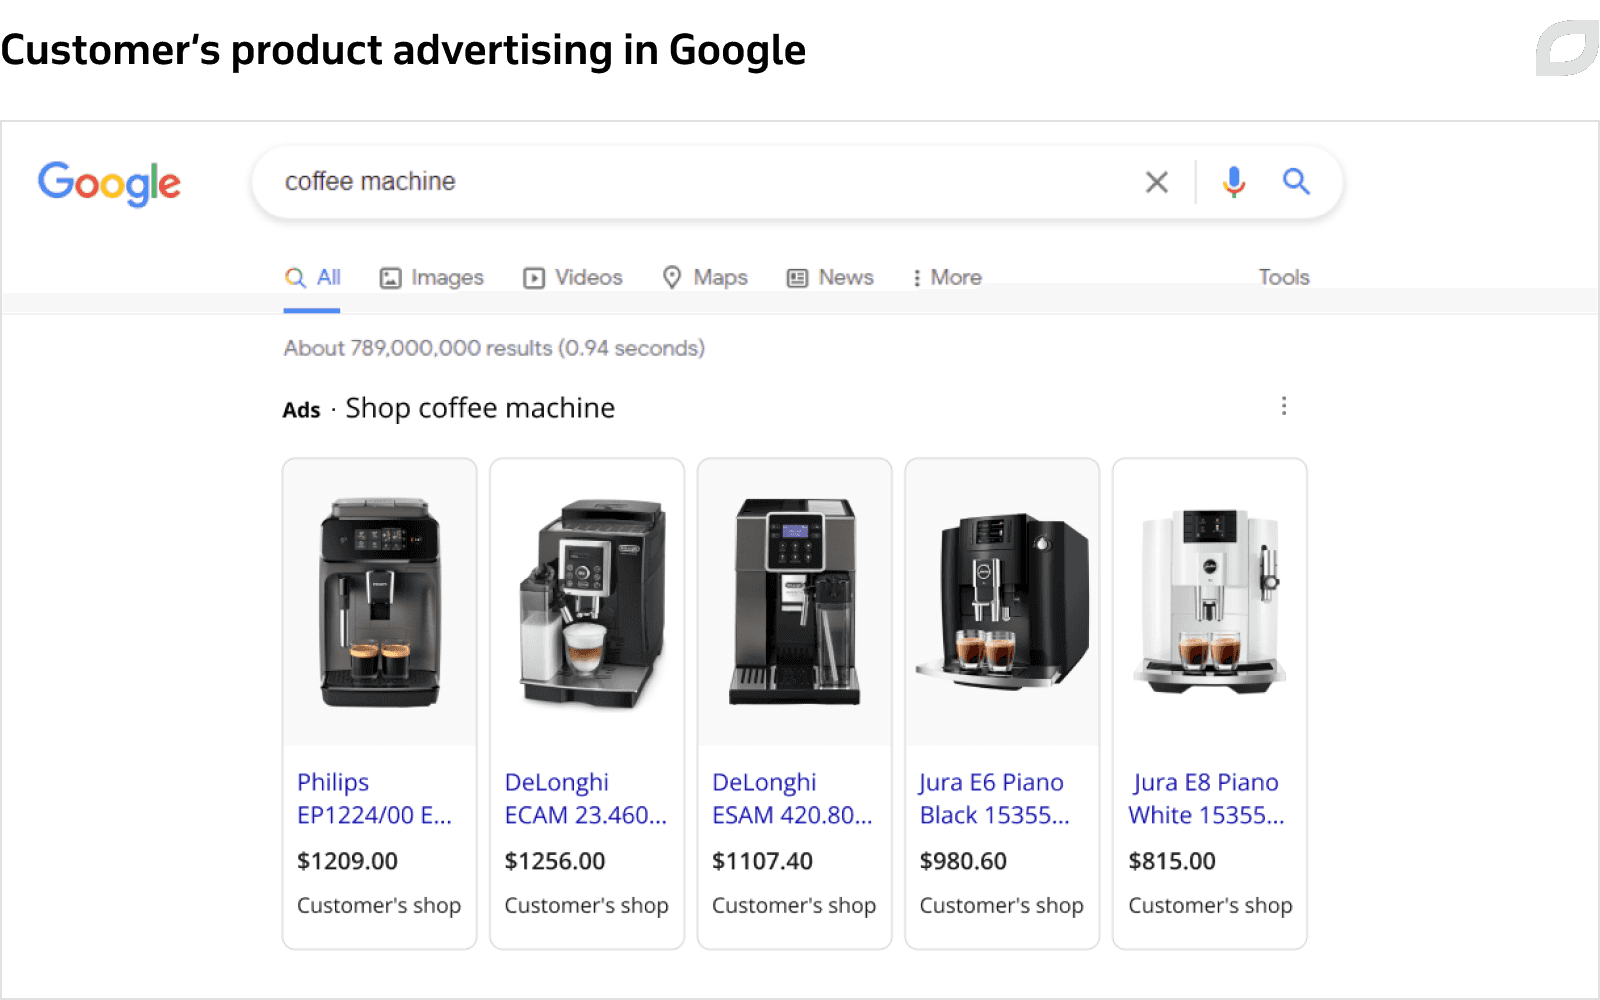 Customer’s product advertising in Google